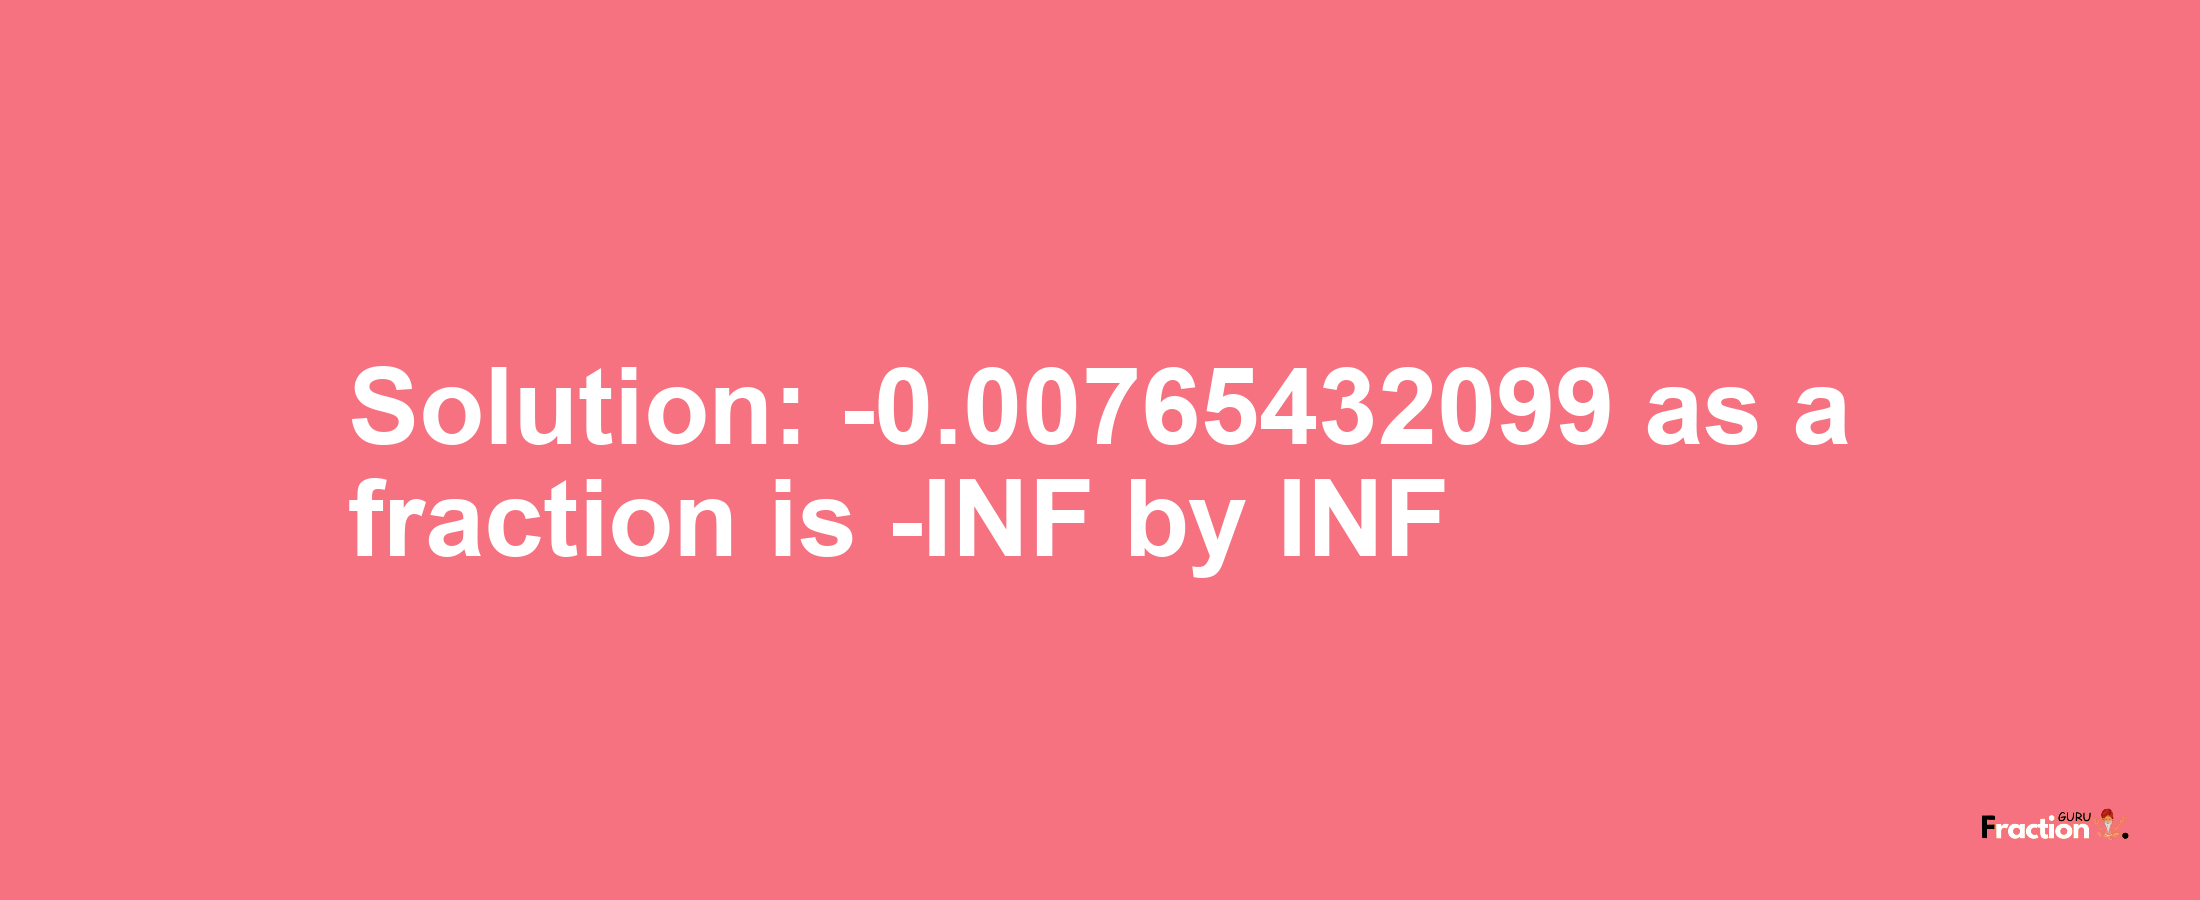 Solution:-0.00765432099 as a fraction is -INF/INF